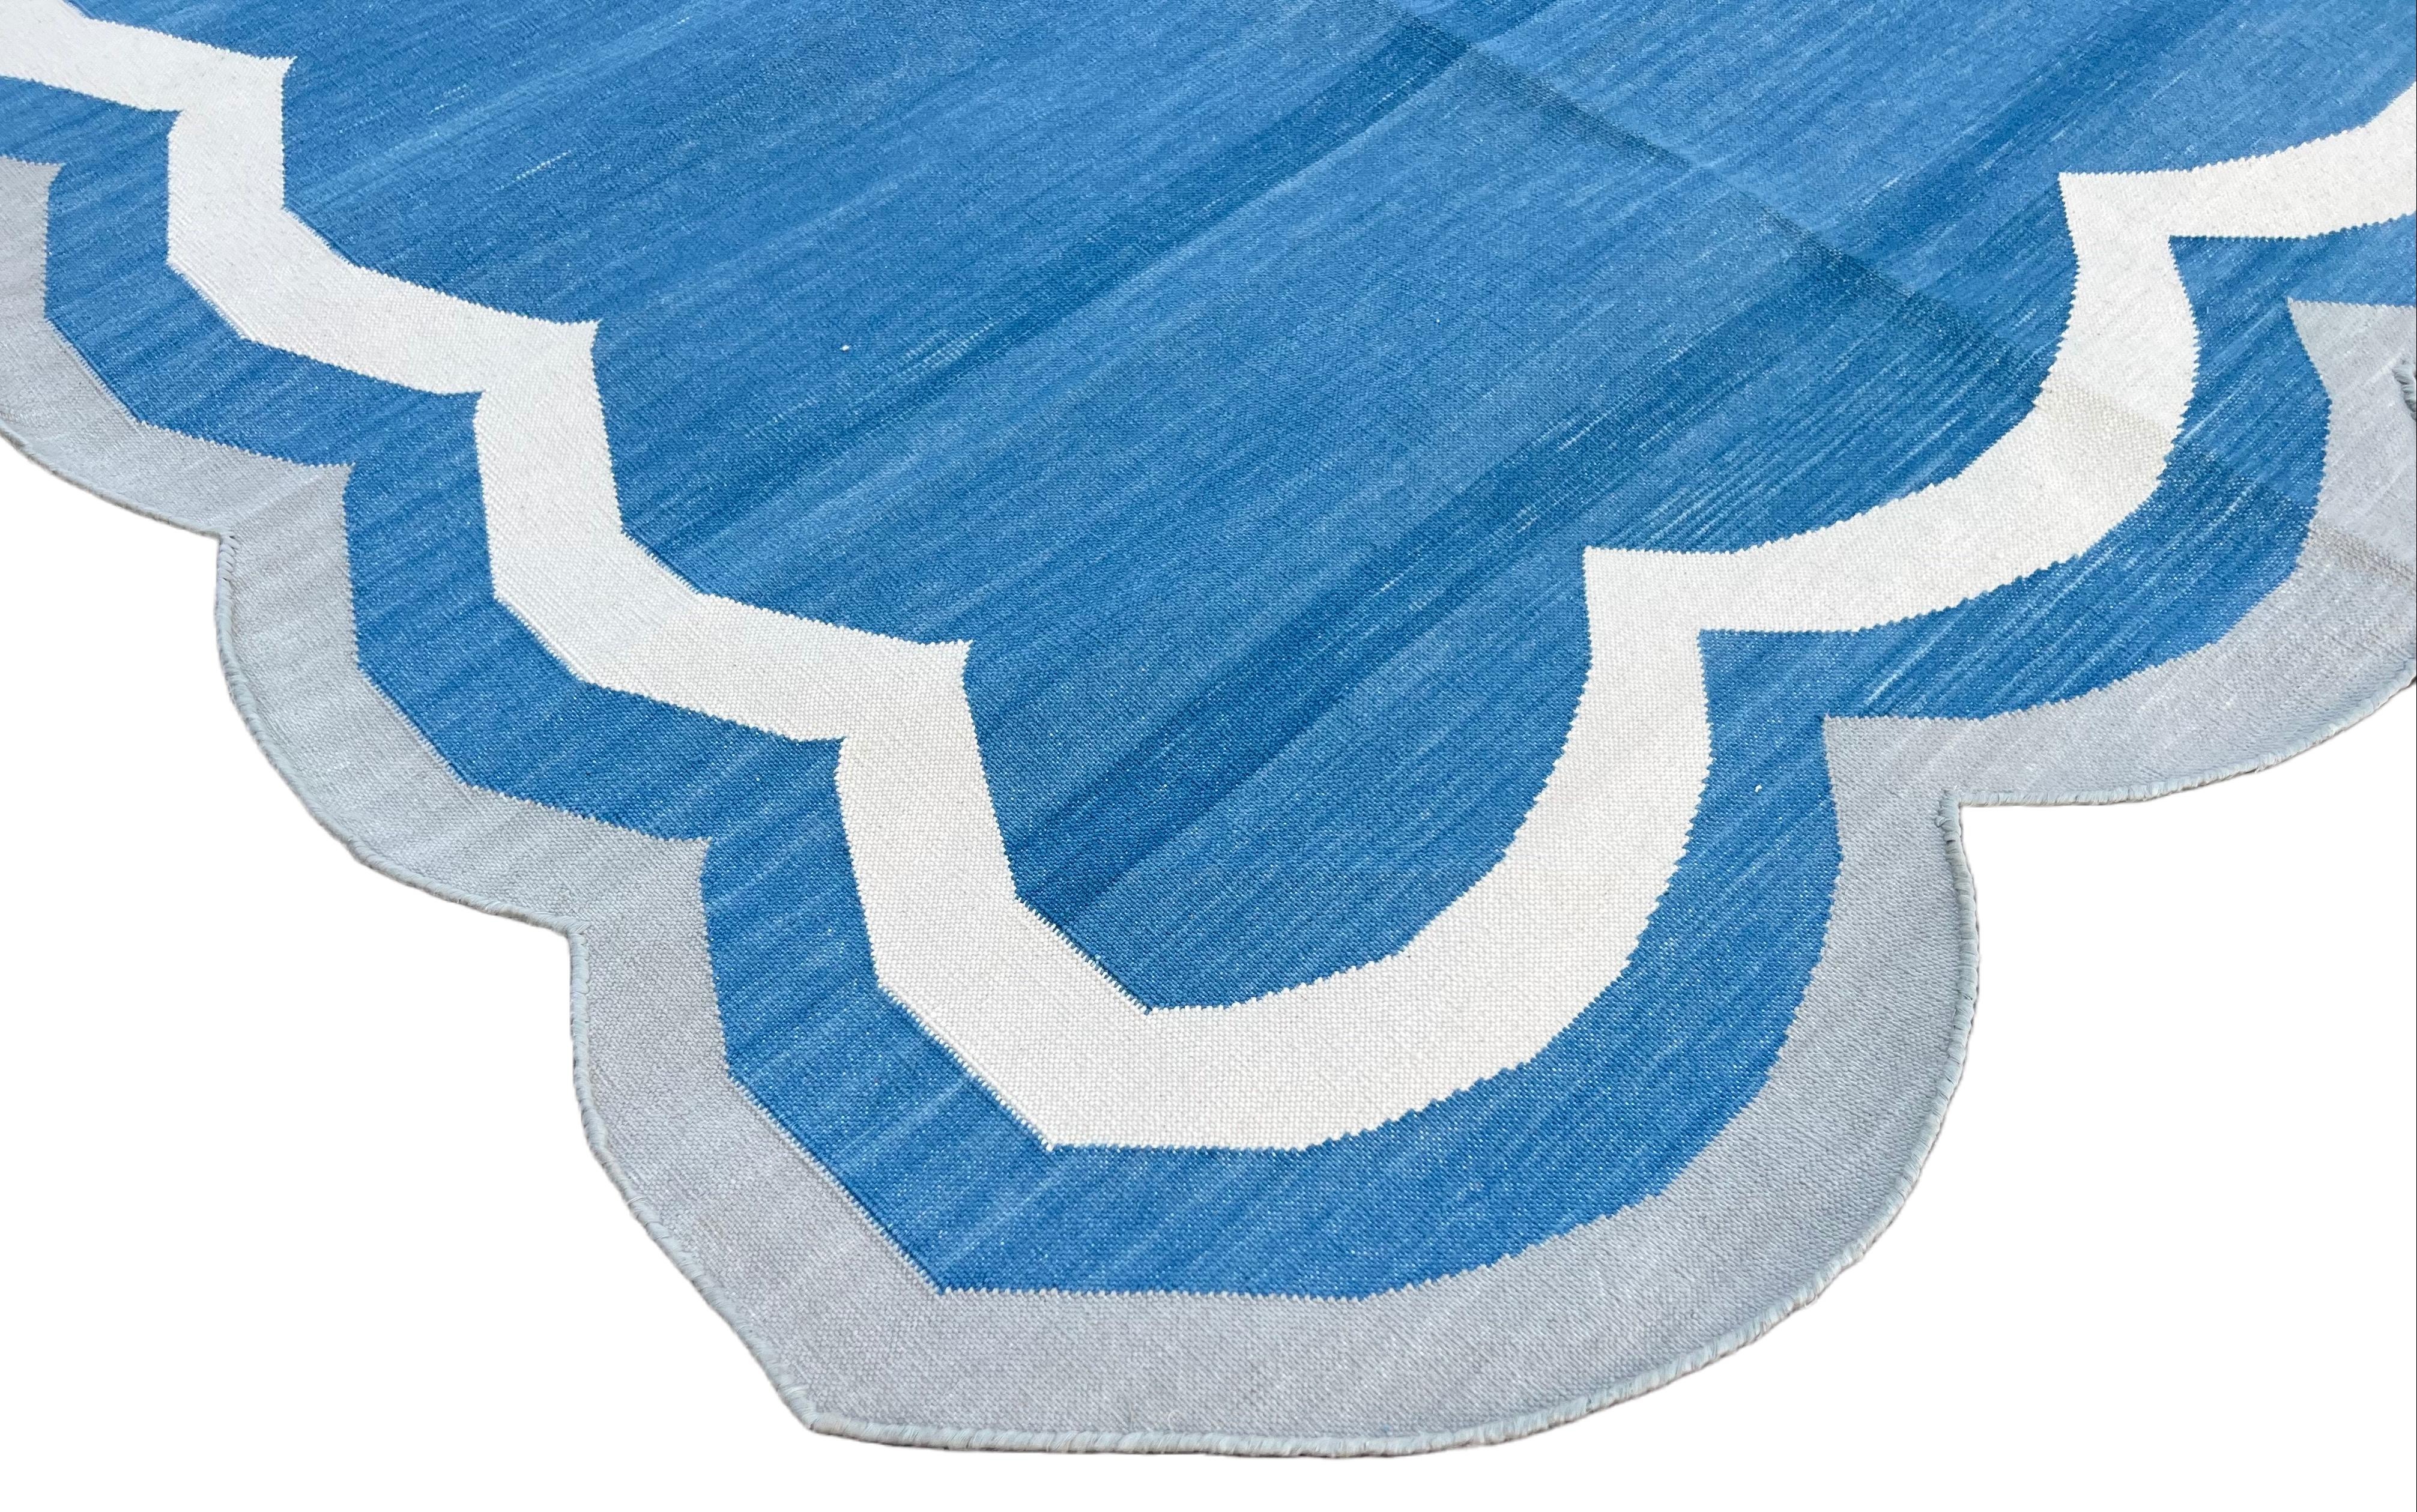 Cotton Natural Vegetable Dyed, Blue, Cream And Grey Scalloped Striped Indian Rug - 8'x10'
These special flat-weave dhurries are hand-woven with 15 ply 100% cotton yarn. Due to the special manufacturing techniques used to create our rugs, the size